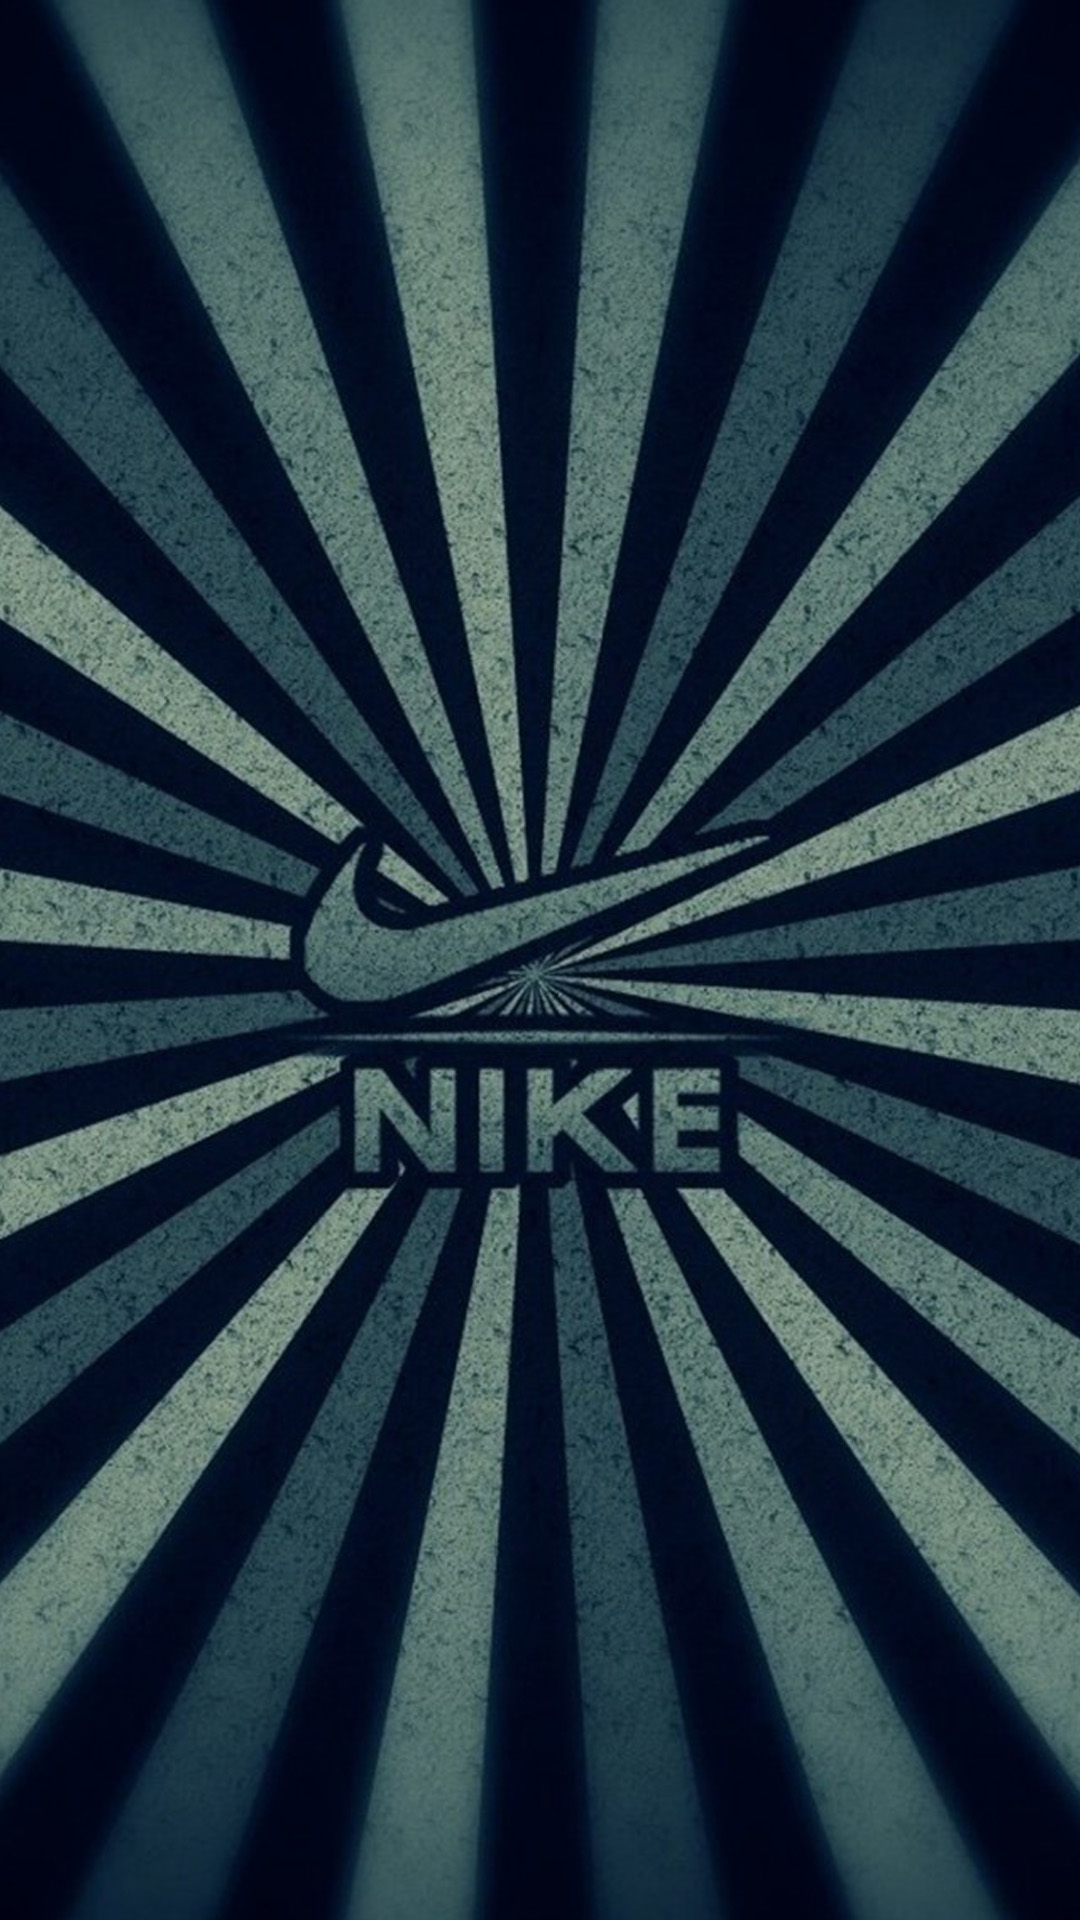 Nike LOGO 04 S4 Wallpapers, Samsung Galaxy S4 Wallpapers